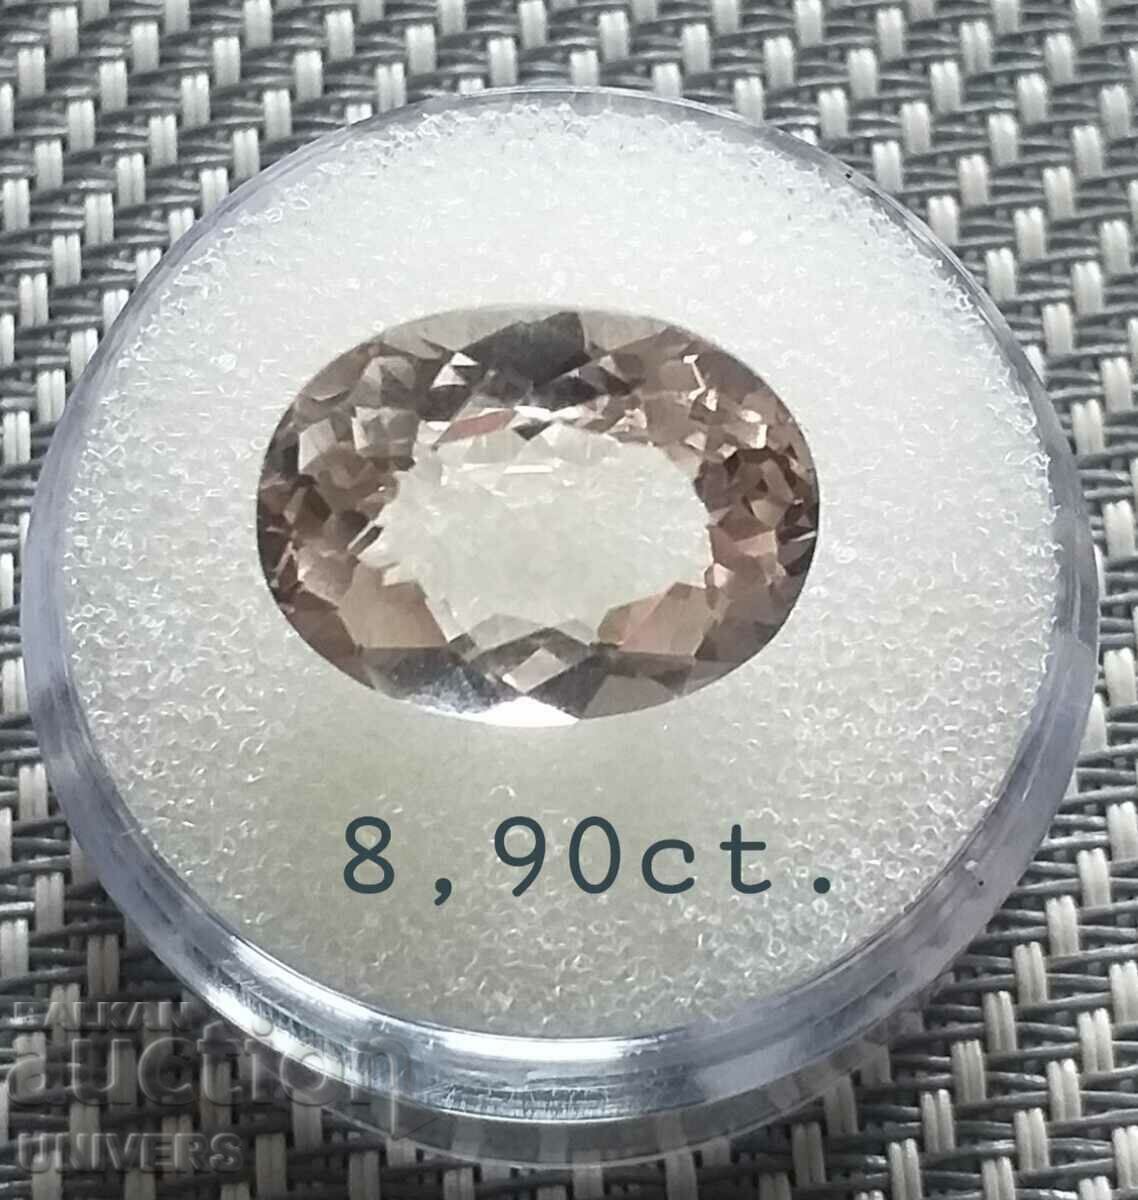 ТОПАЗ IMPERIAL 8,90ct.